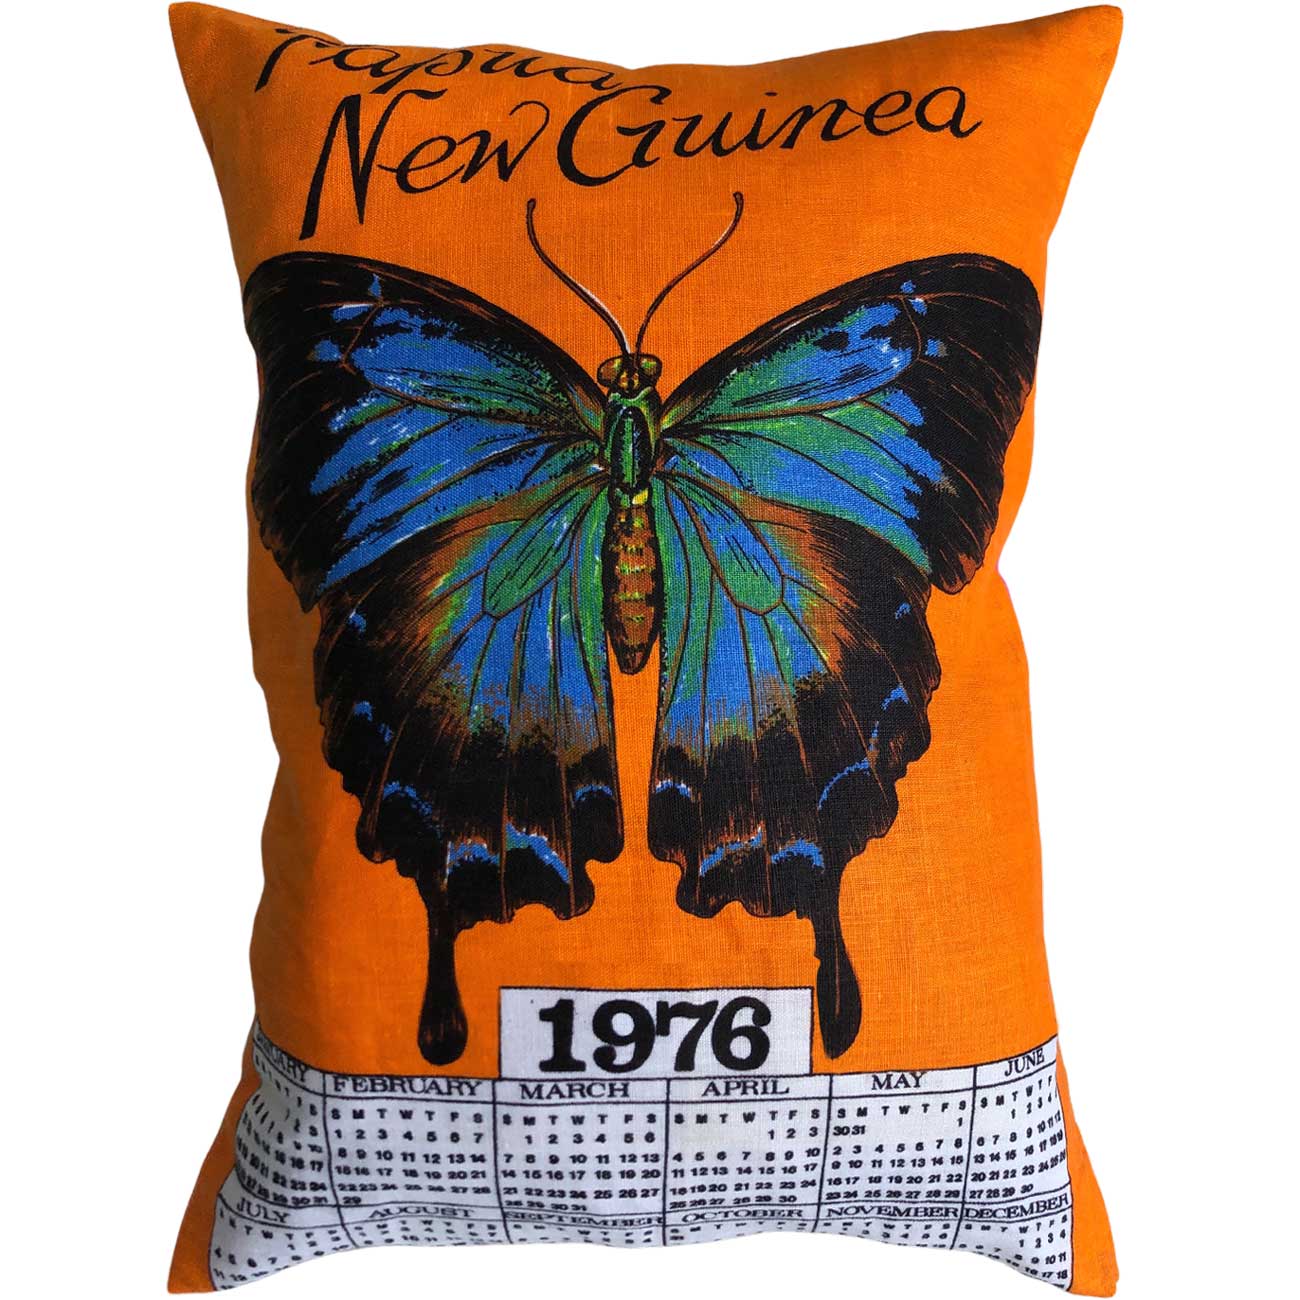 1976 calendar teatowel, with Ulysees Blue butterfly